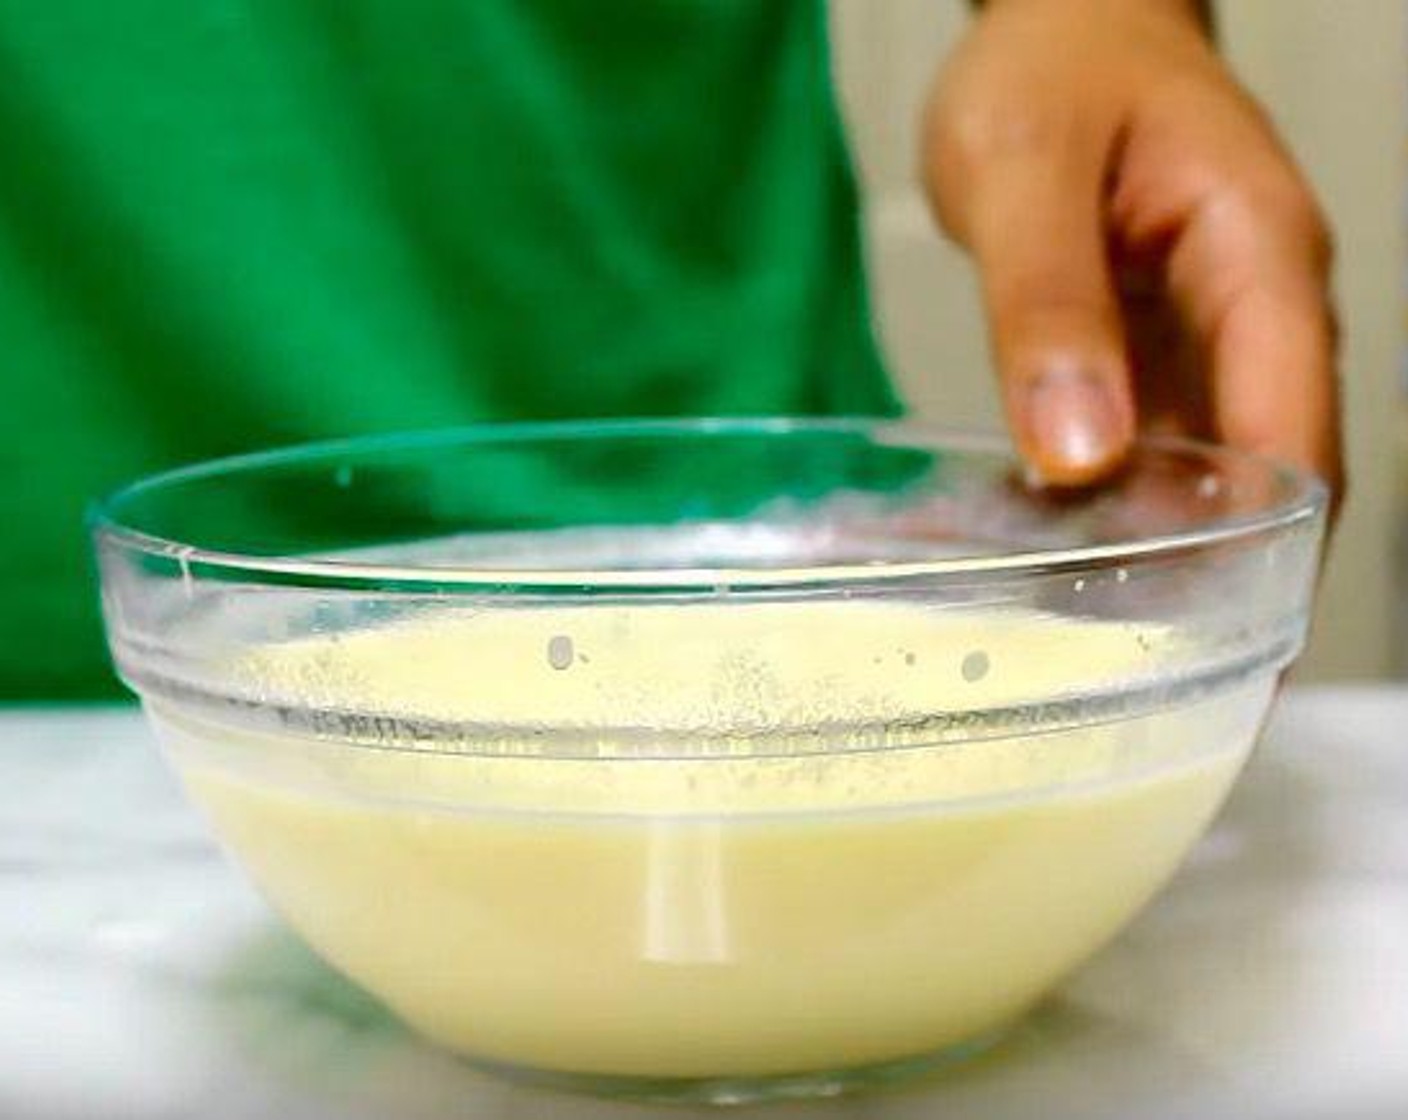 step 3 In a mixing bowl, add Farmhouse Eggs® Large Brown Eggs (2), Buttermilk (3/4 cup), and Whole Milk (3/4 cup). Whisk together until smooth.